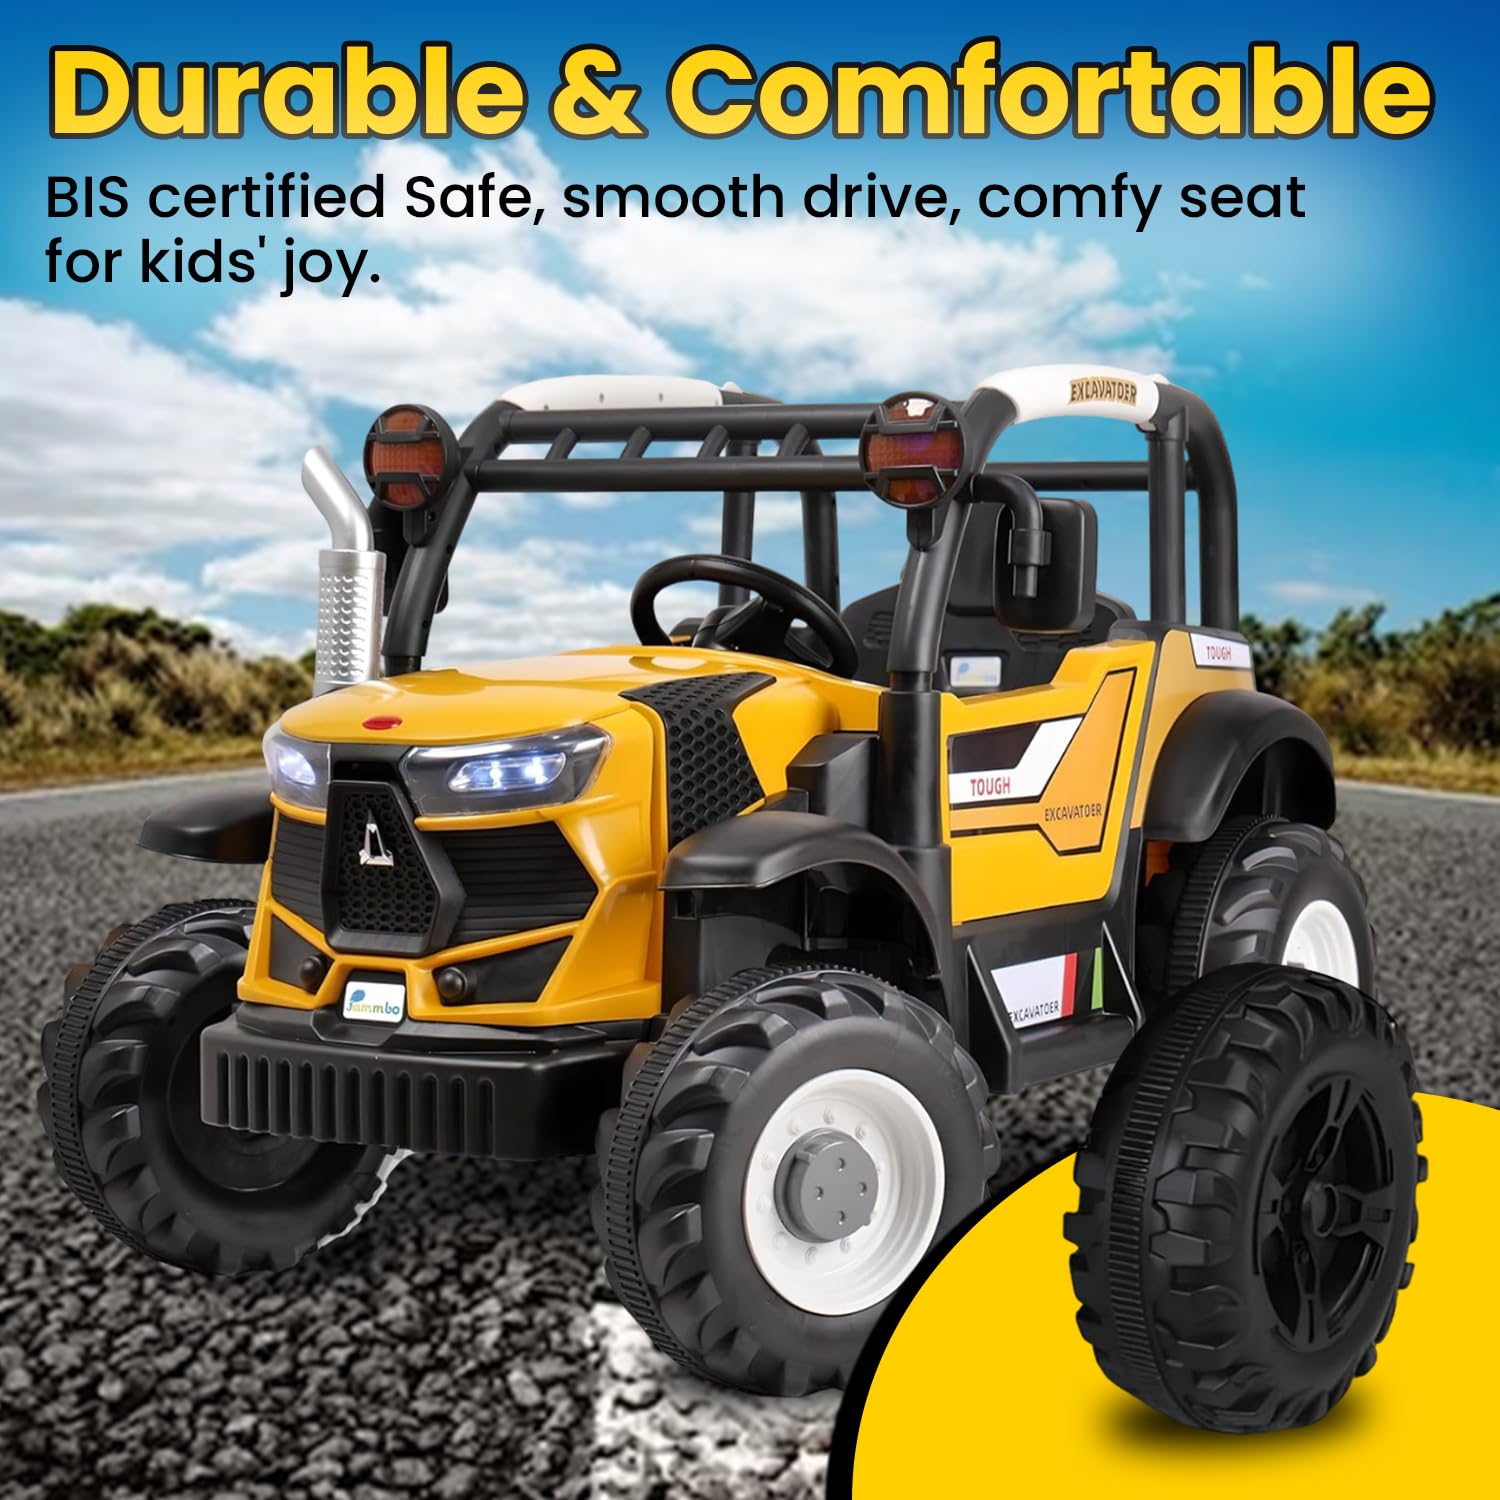 PATOYS | Kids Electric Ride-On Premium Tractor with Dual Control, Realistic Design, Music, Safe Driving excavator for Boys and Girls - (Ages 2-8) - Yellow - PATOYS